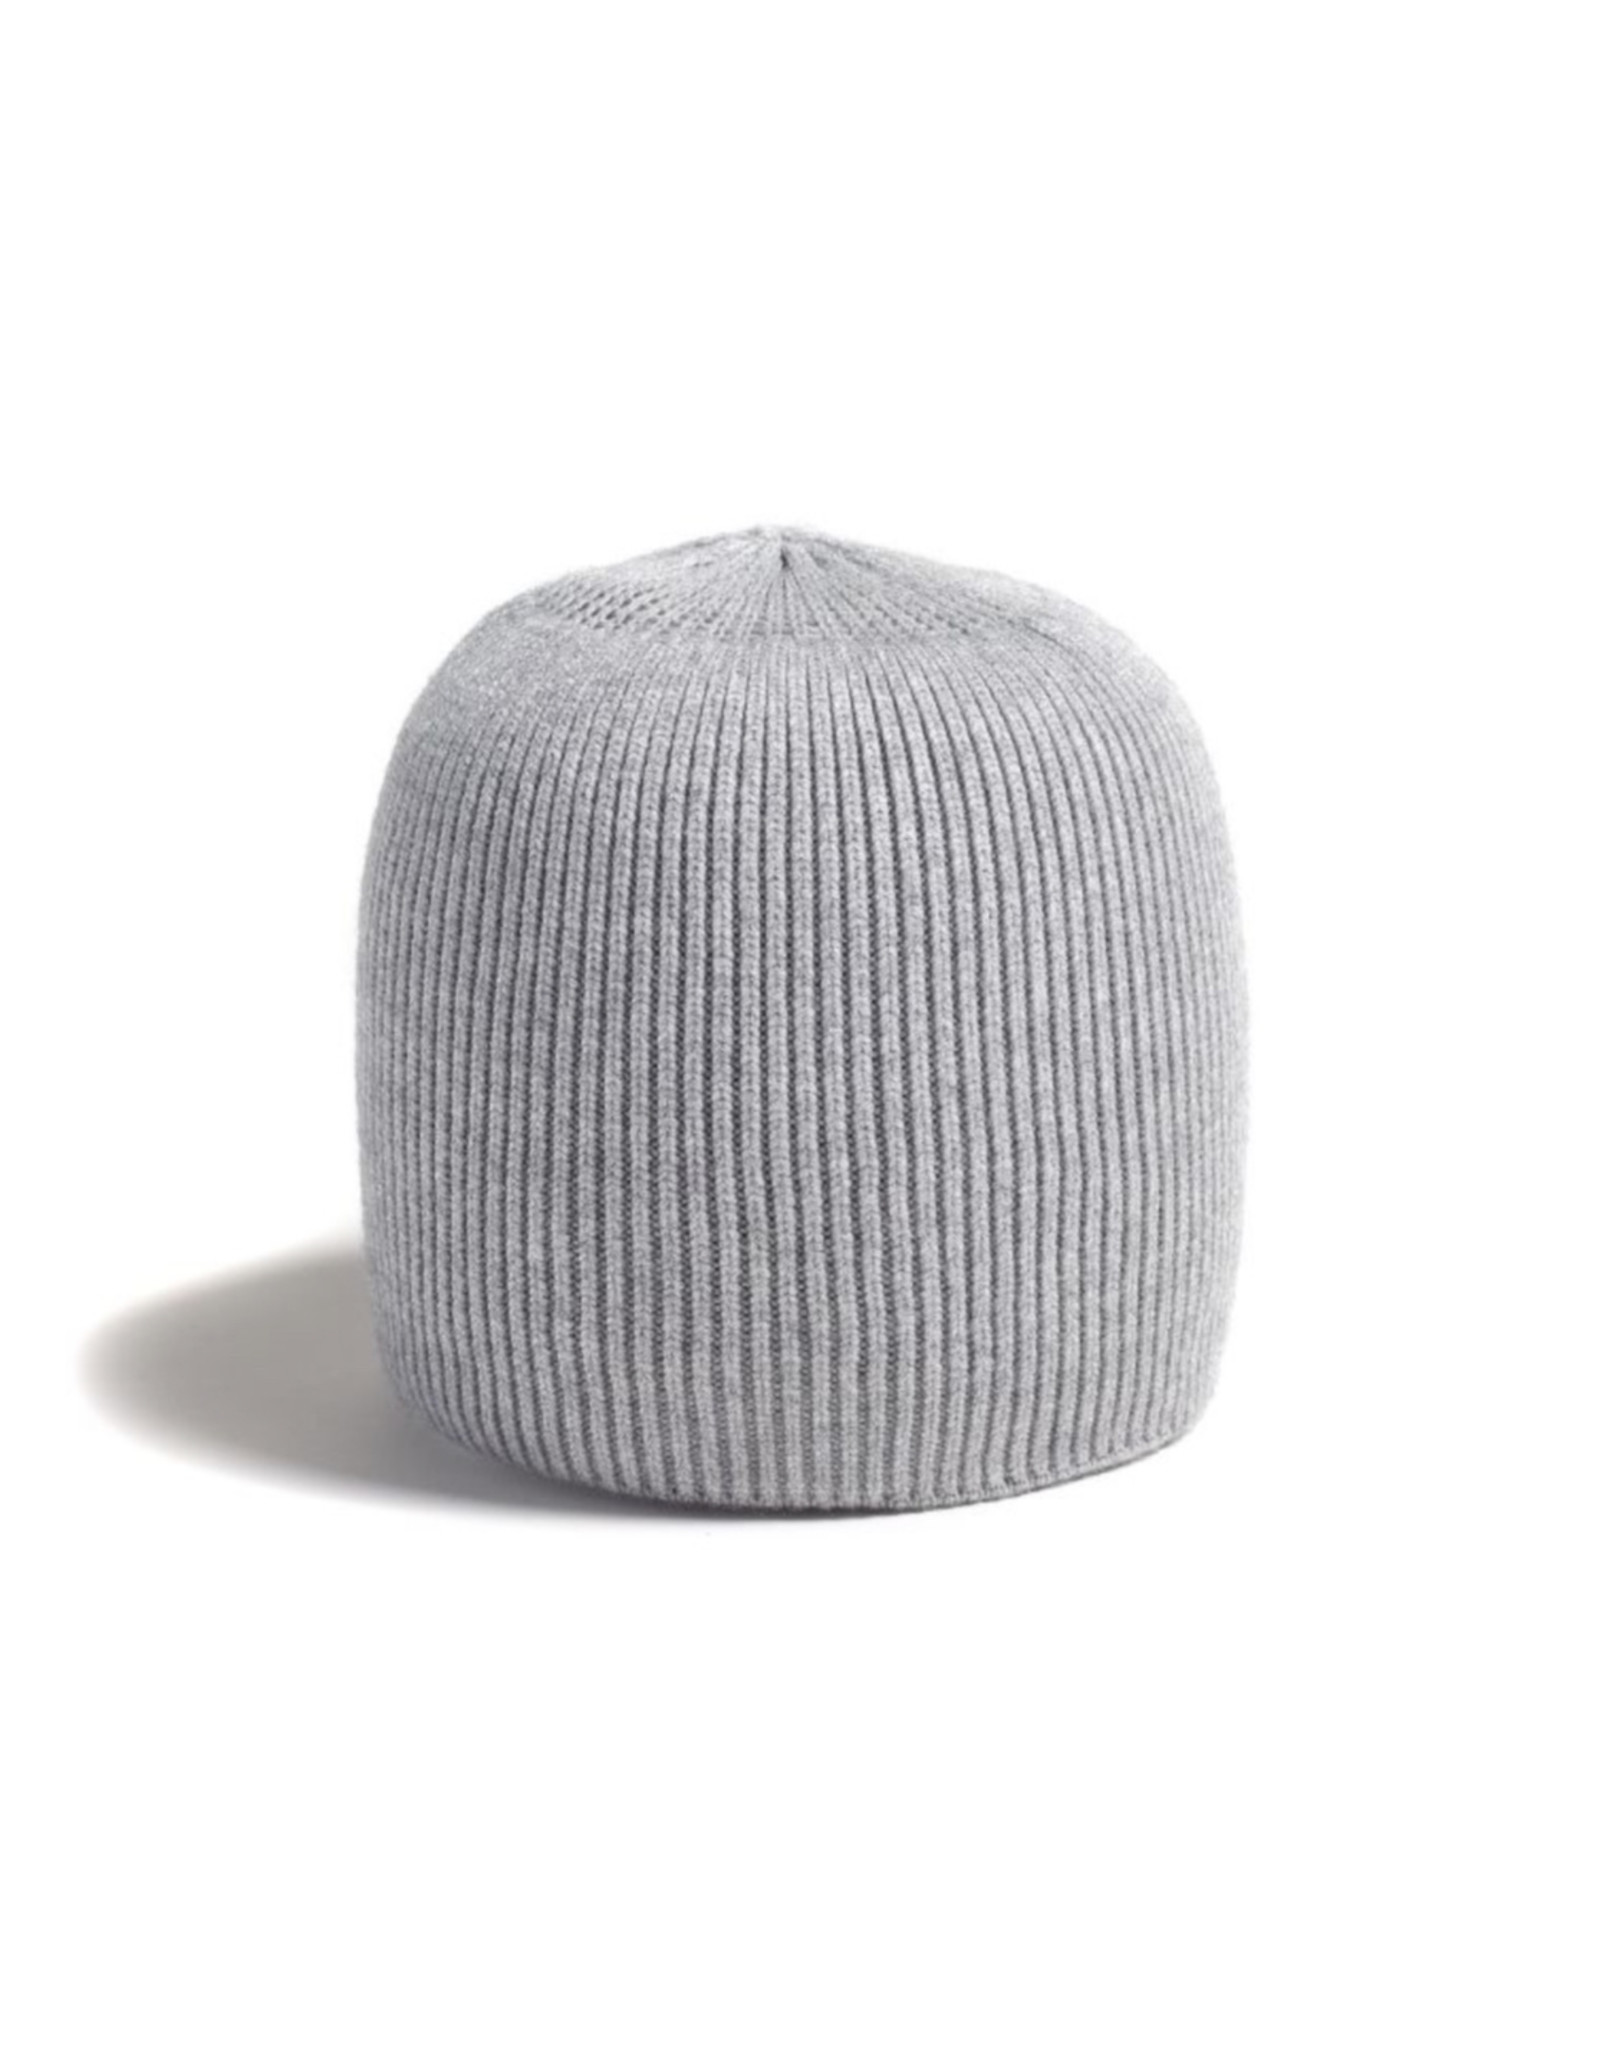 BRUME BRKF2102LH TUQUE MONT GALATEA